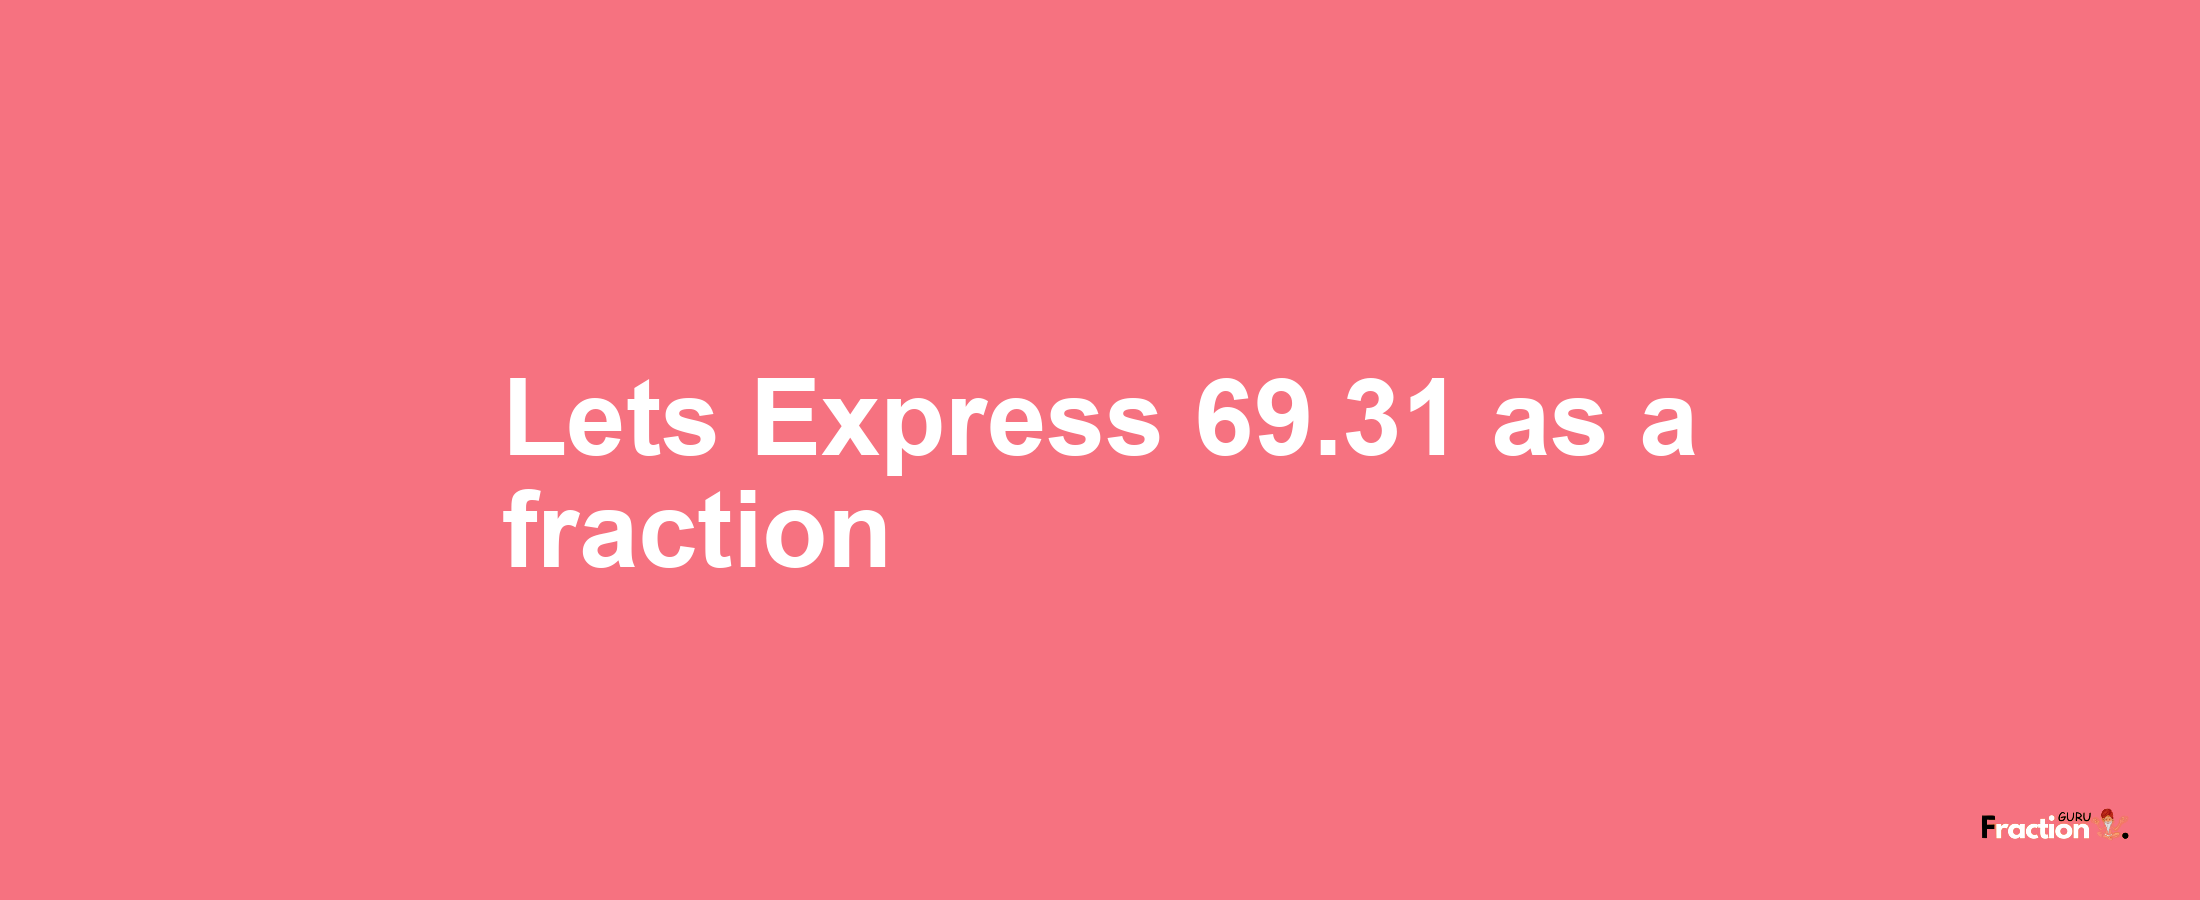 Lets Express 69.31 as afraction